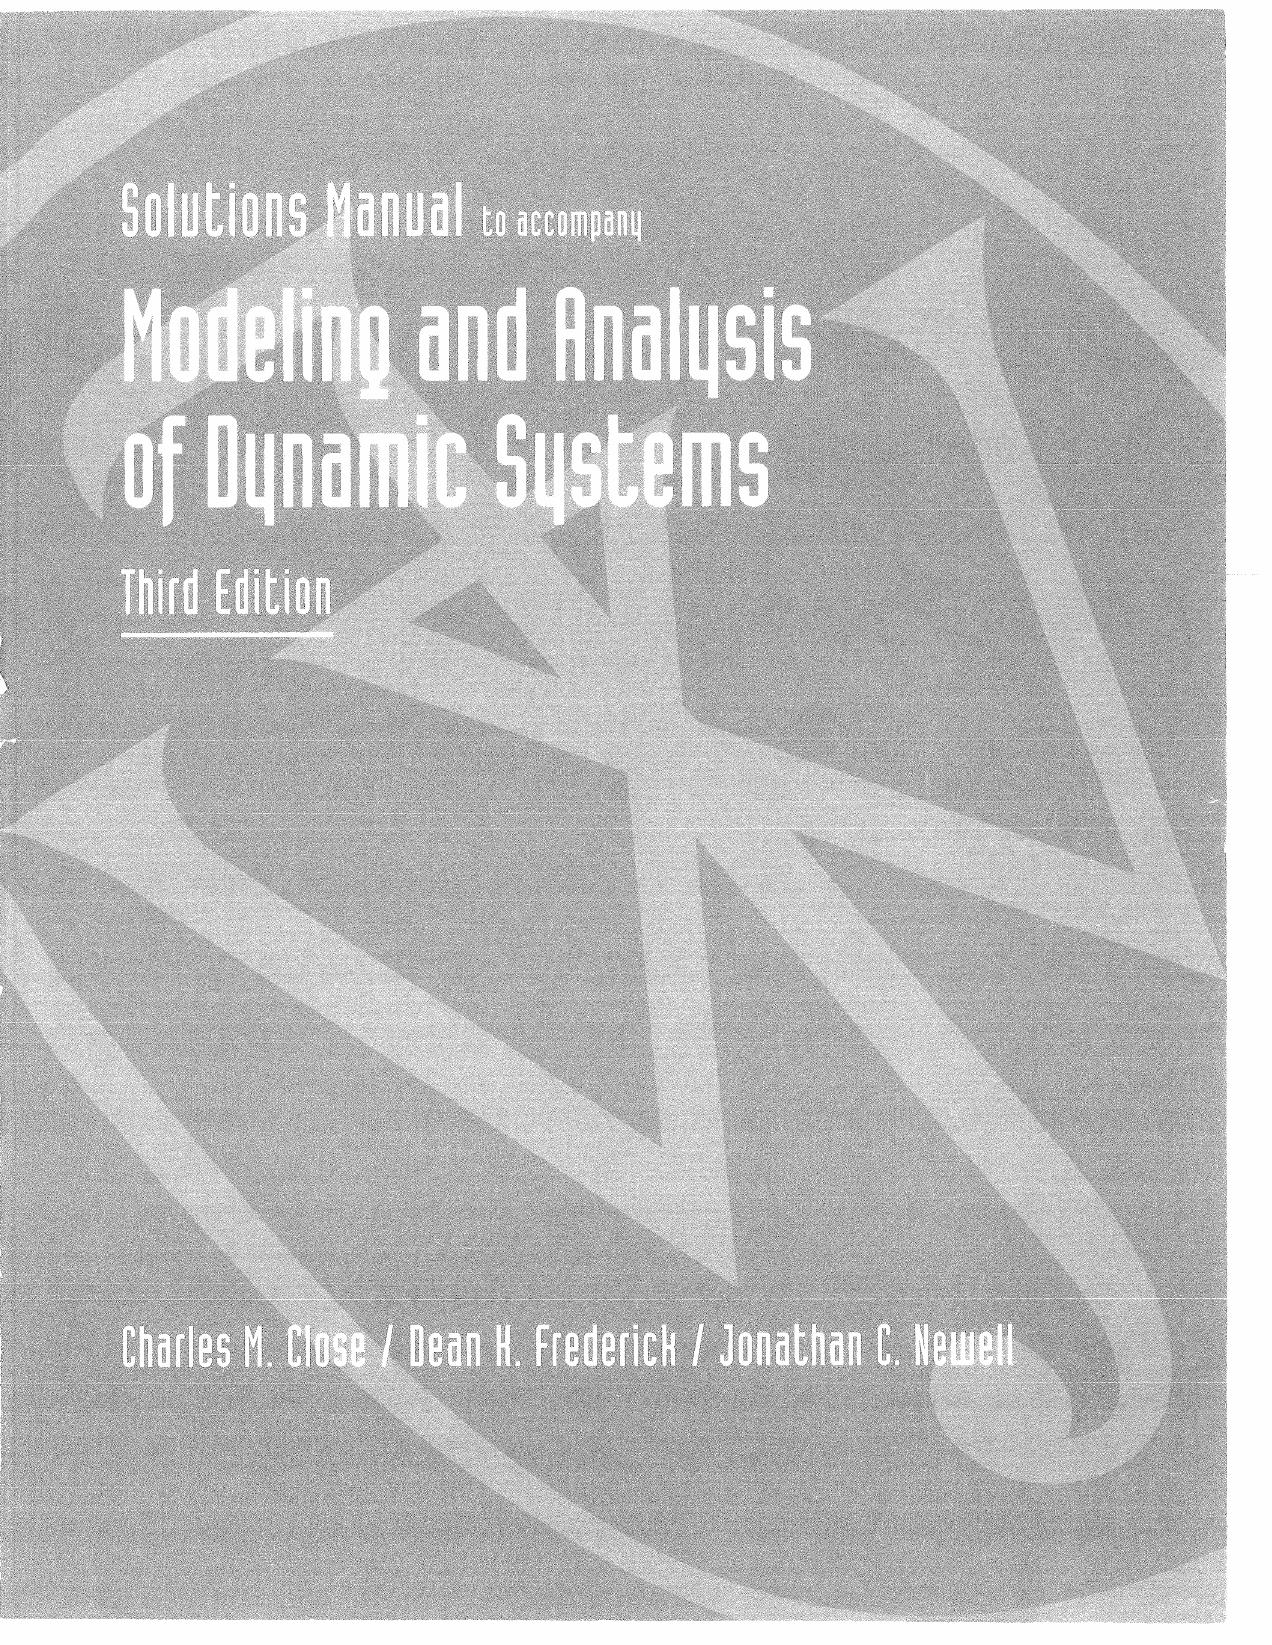 Solutions Manual to accompany Modeling and Analysis of Dynamic Systems by Charles M. Close Dean K. Frederick Jonathan C. Newell